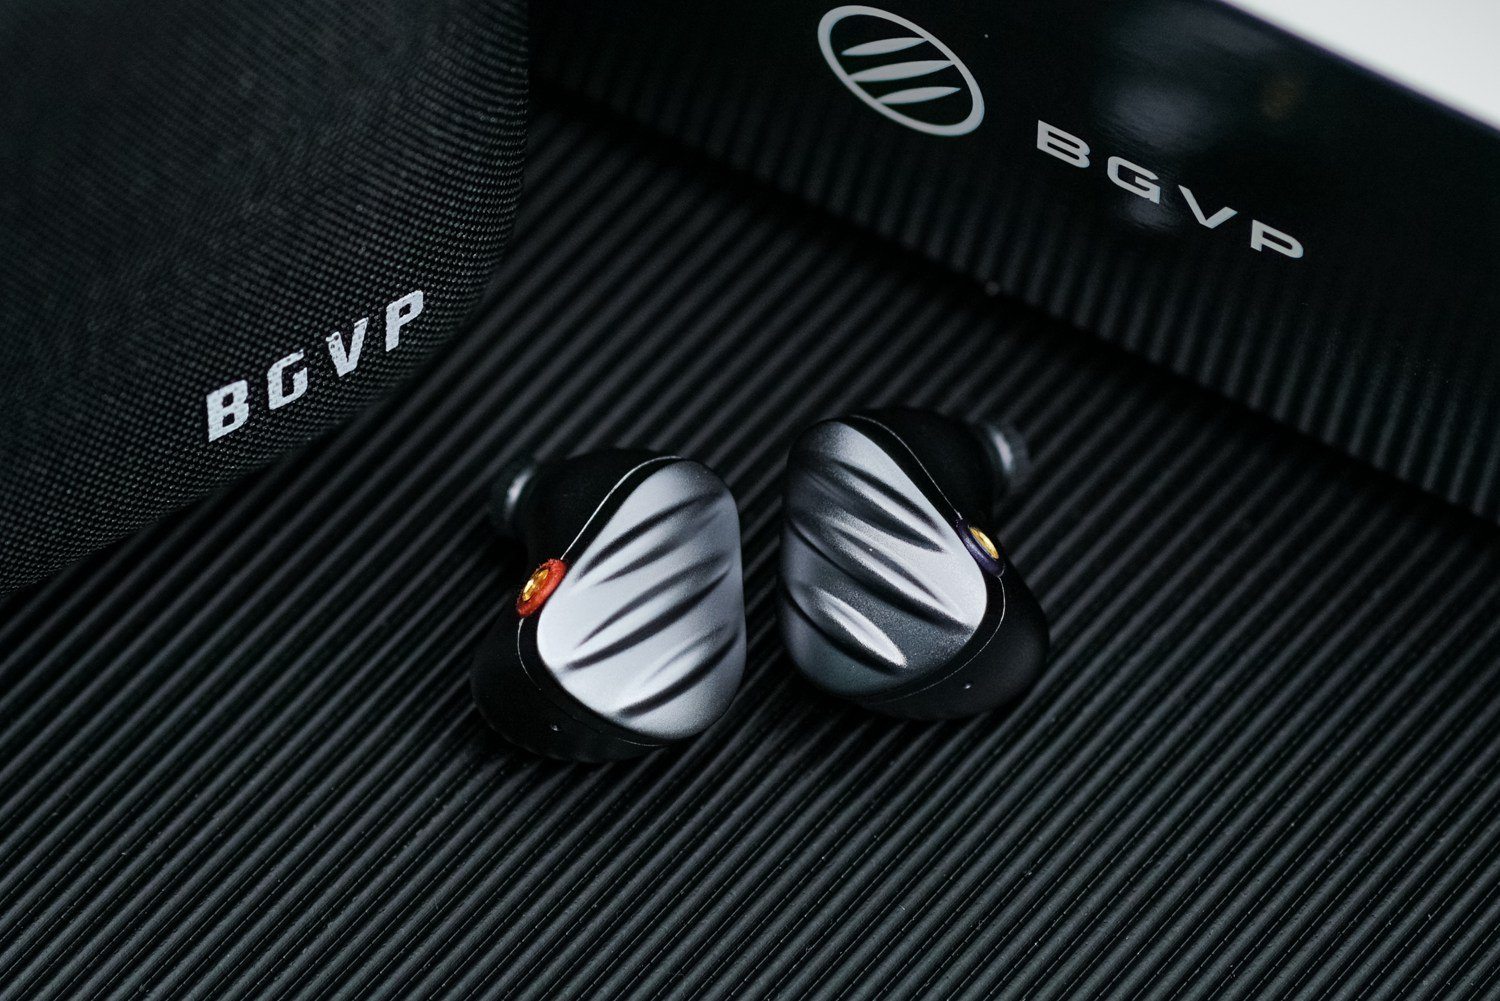 BGVP NS9 9-Driver Hybrid IEM Unboxing & Quick Review: Thick & Powerful